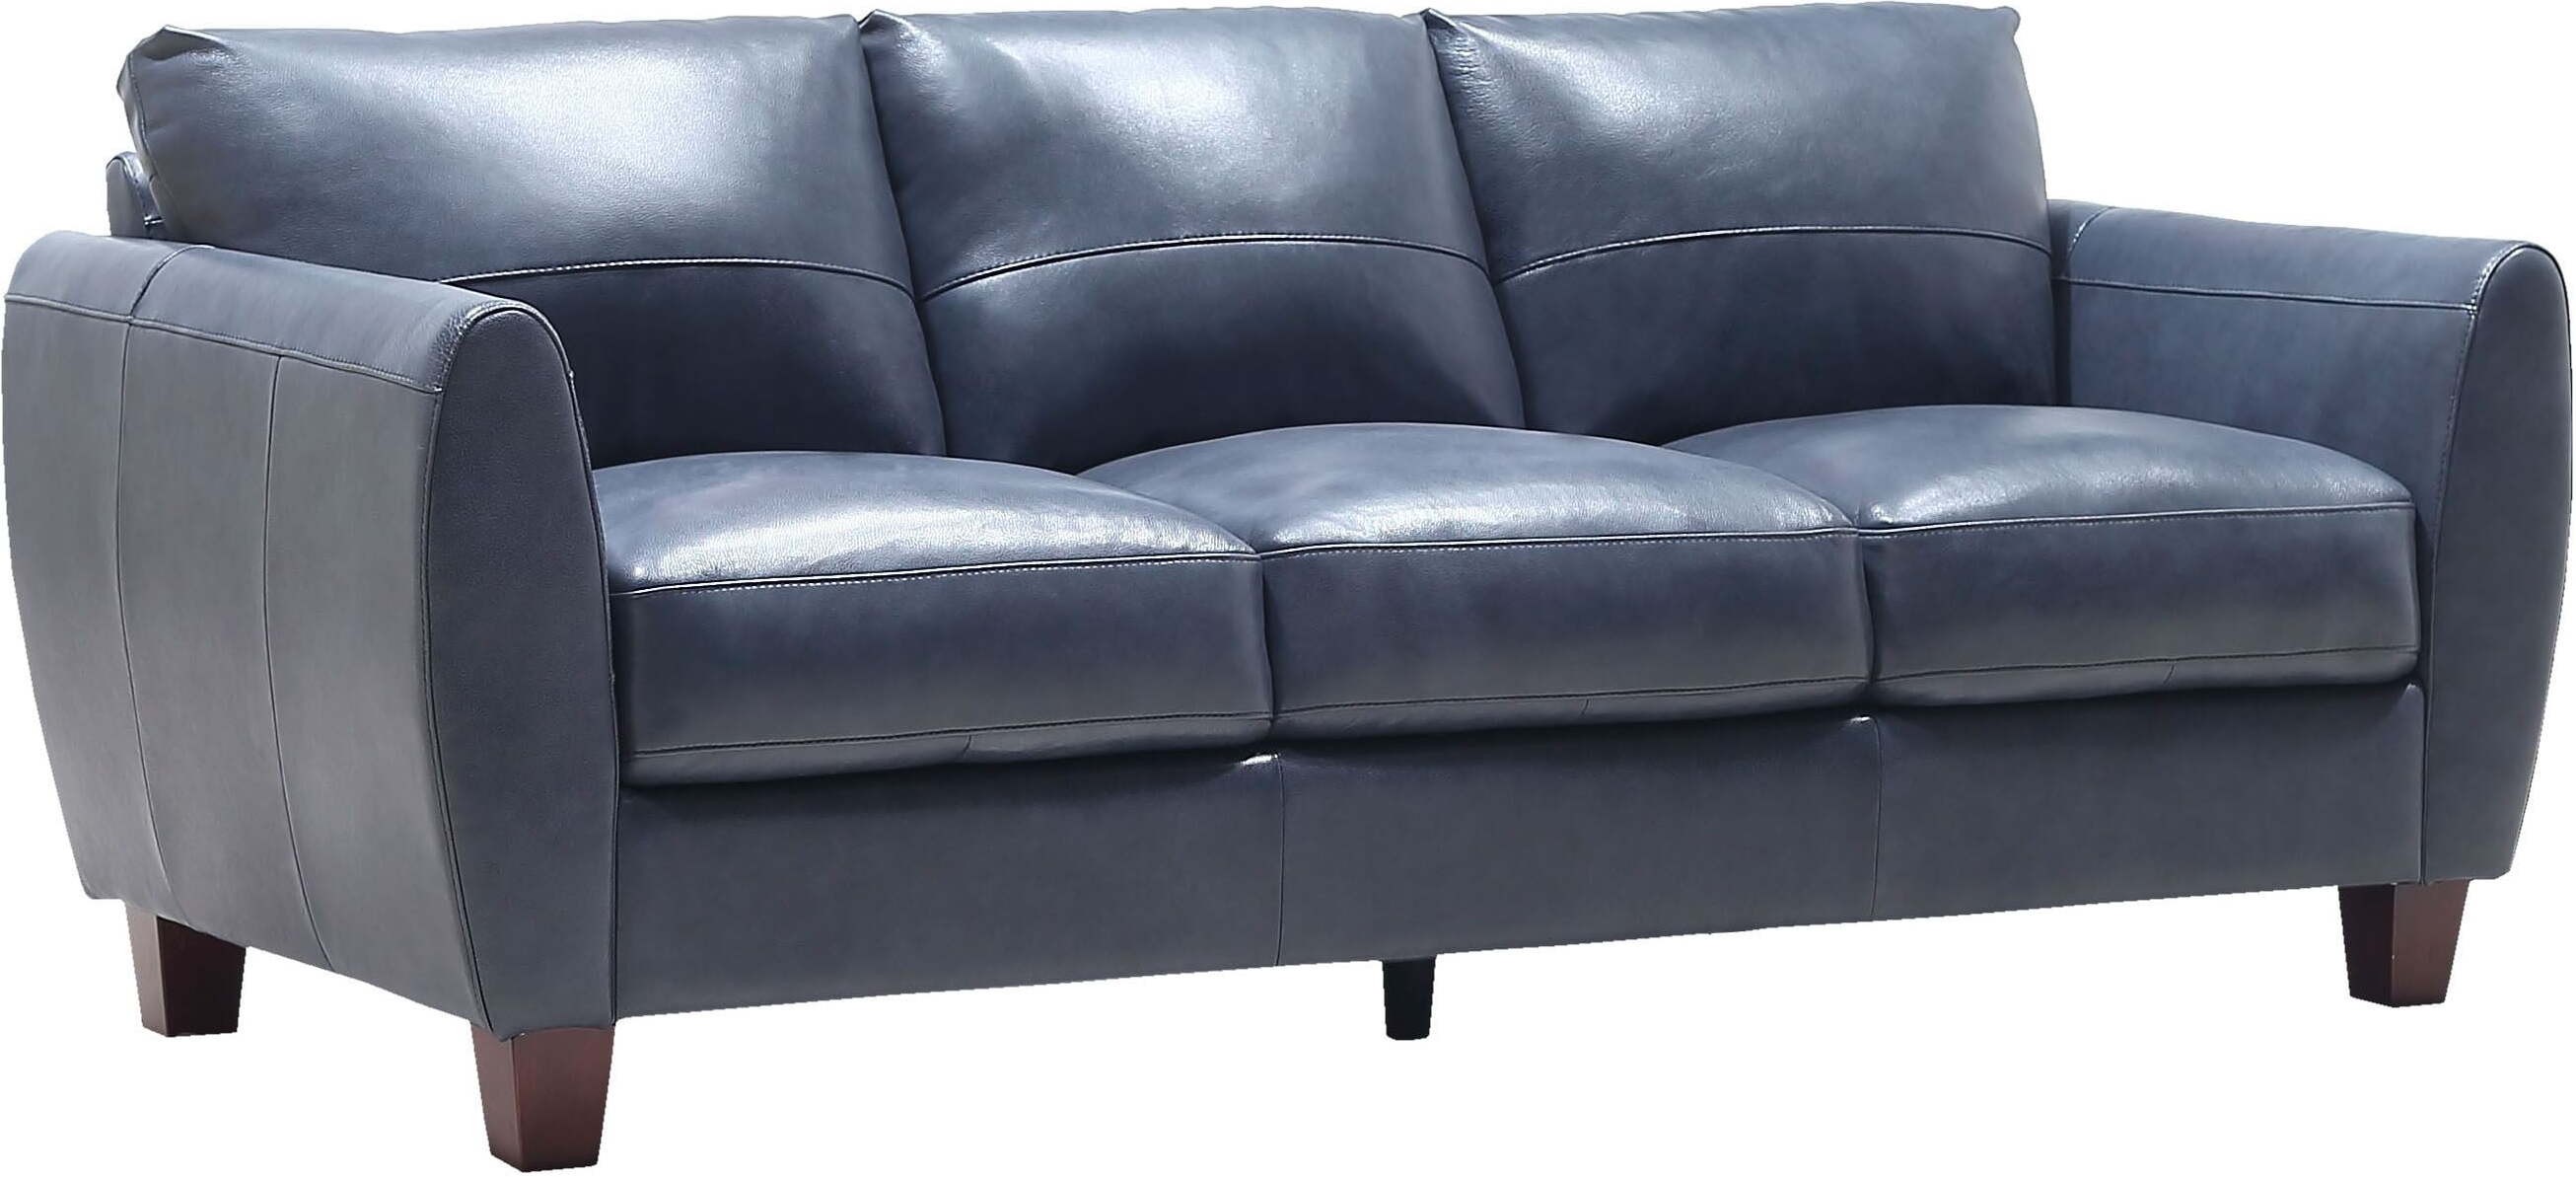 leather and blue sofa